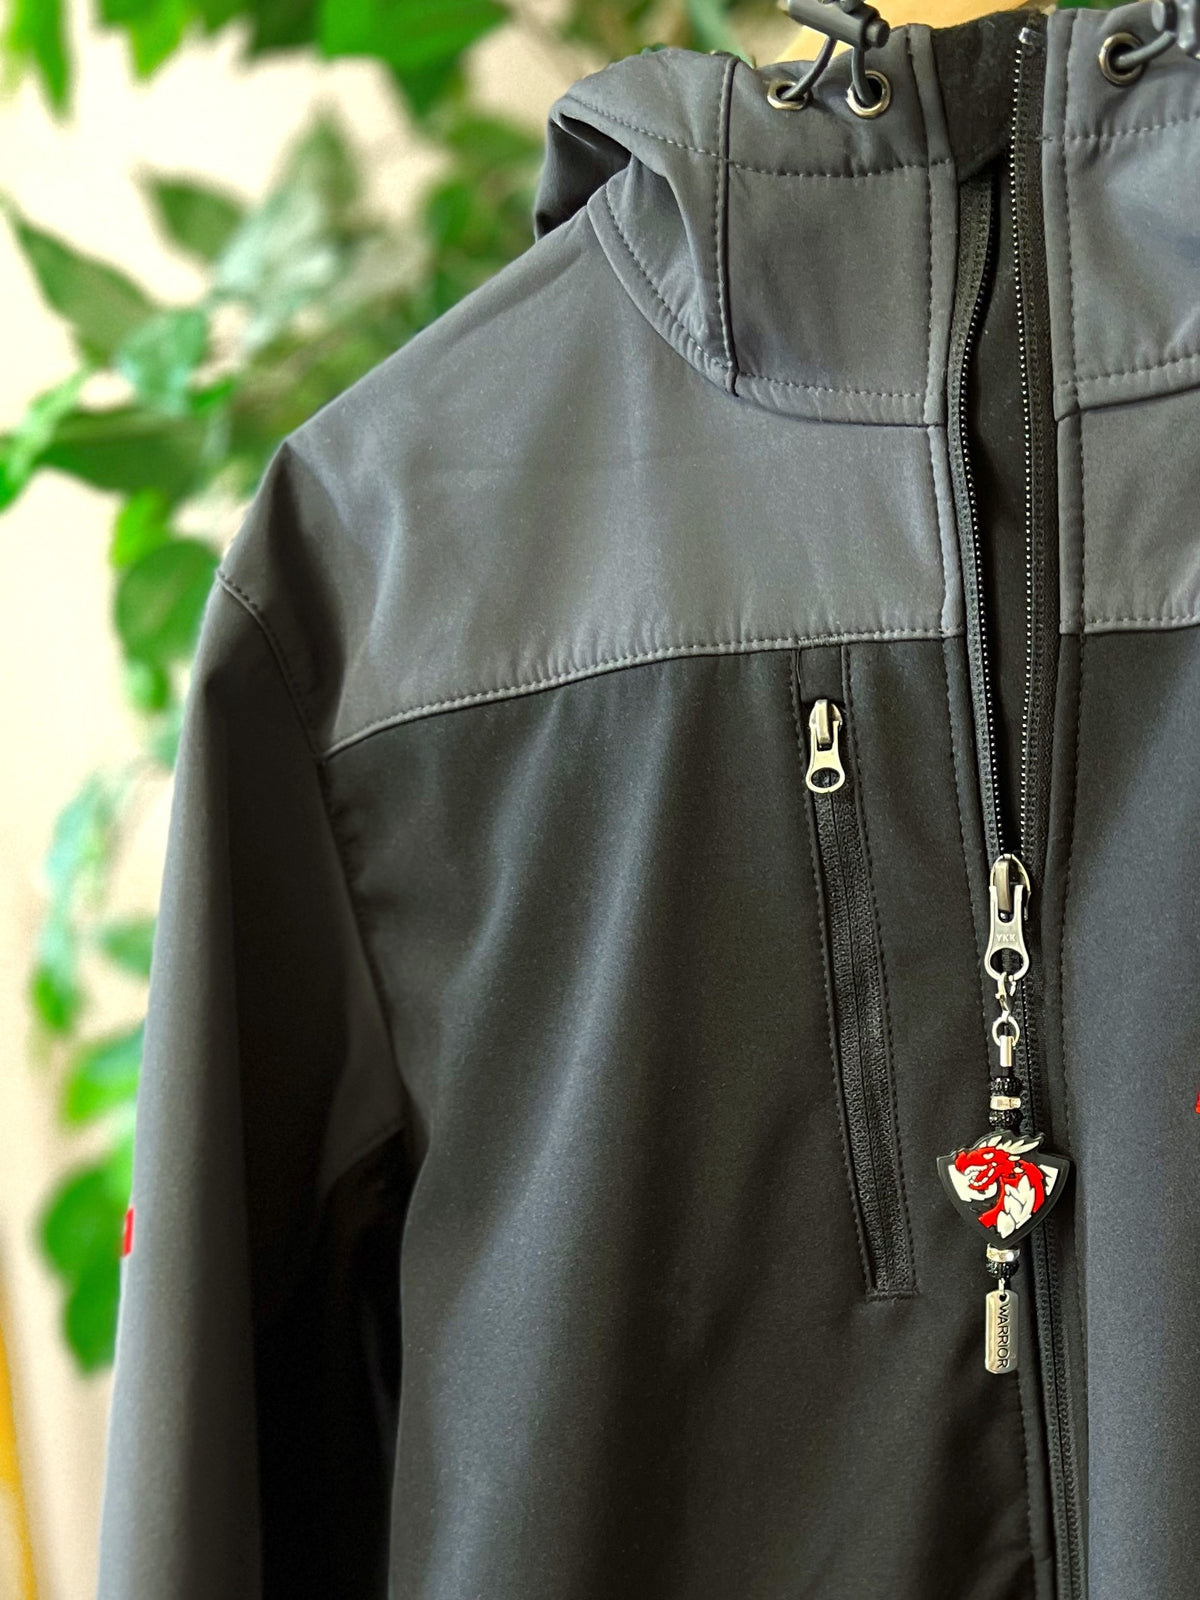 black and grey jacket with bling zipper pull with dragon bead charm